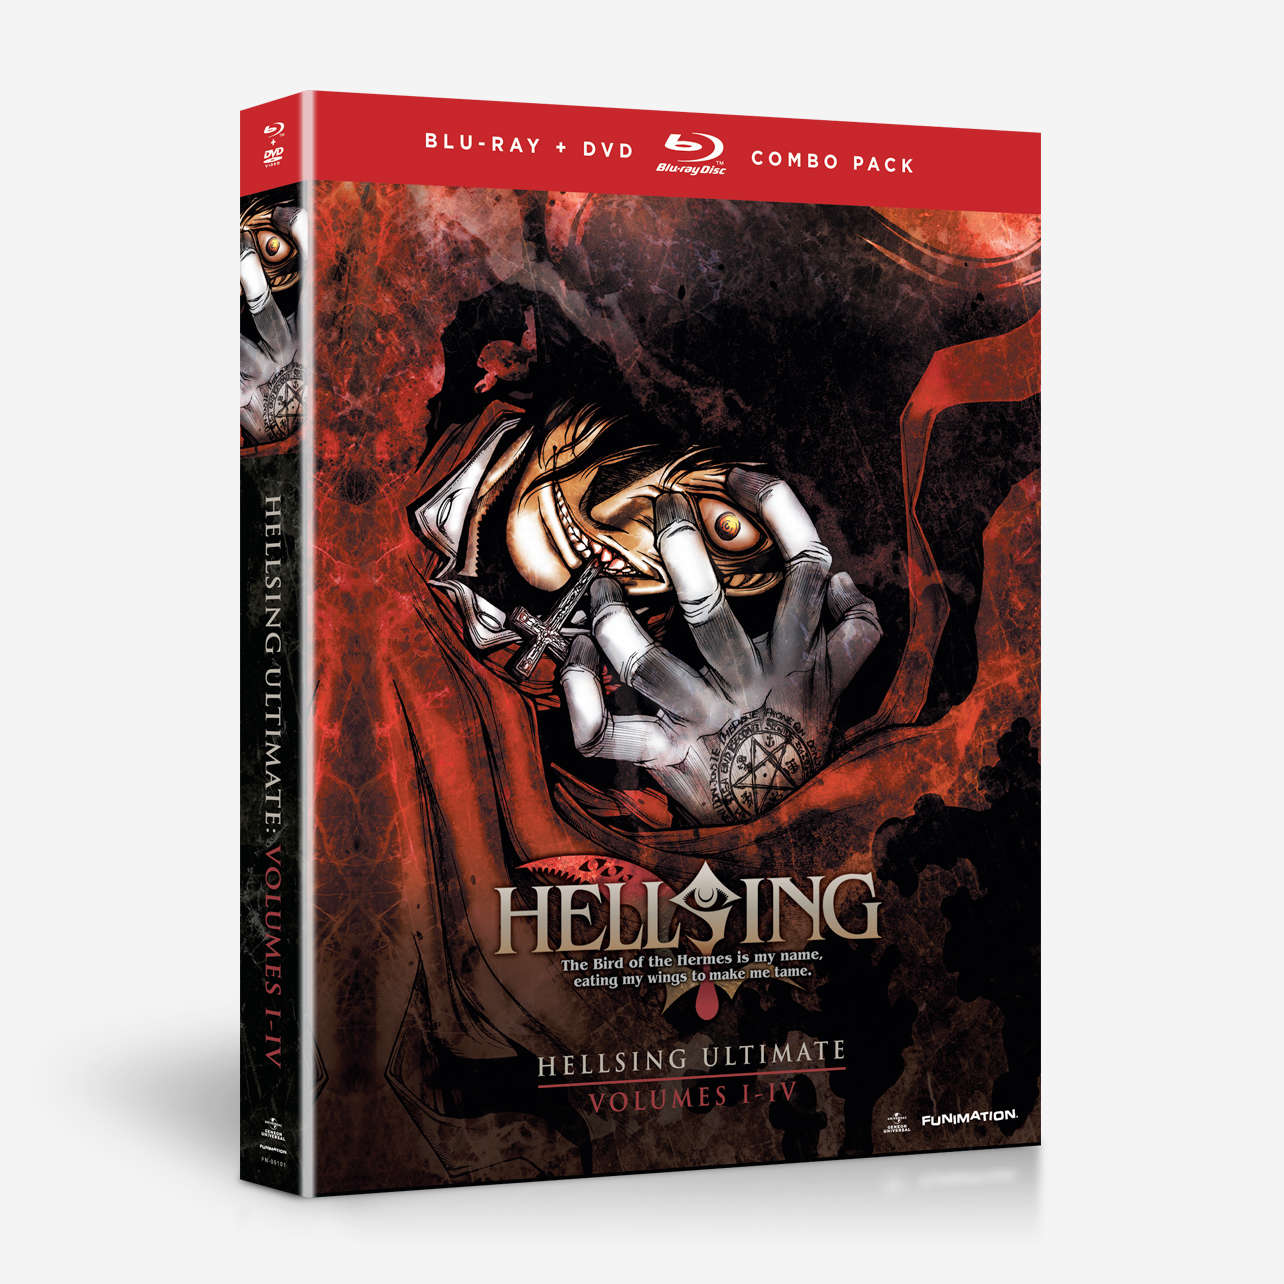 how many volumes of hellsing deluxe editions are there